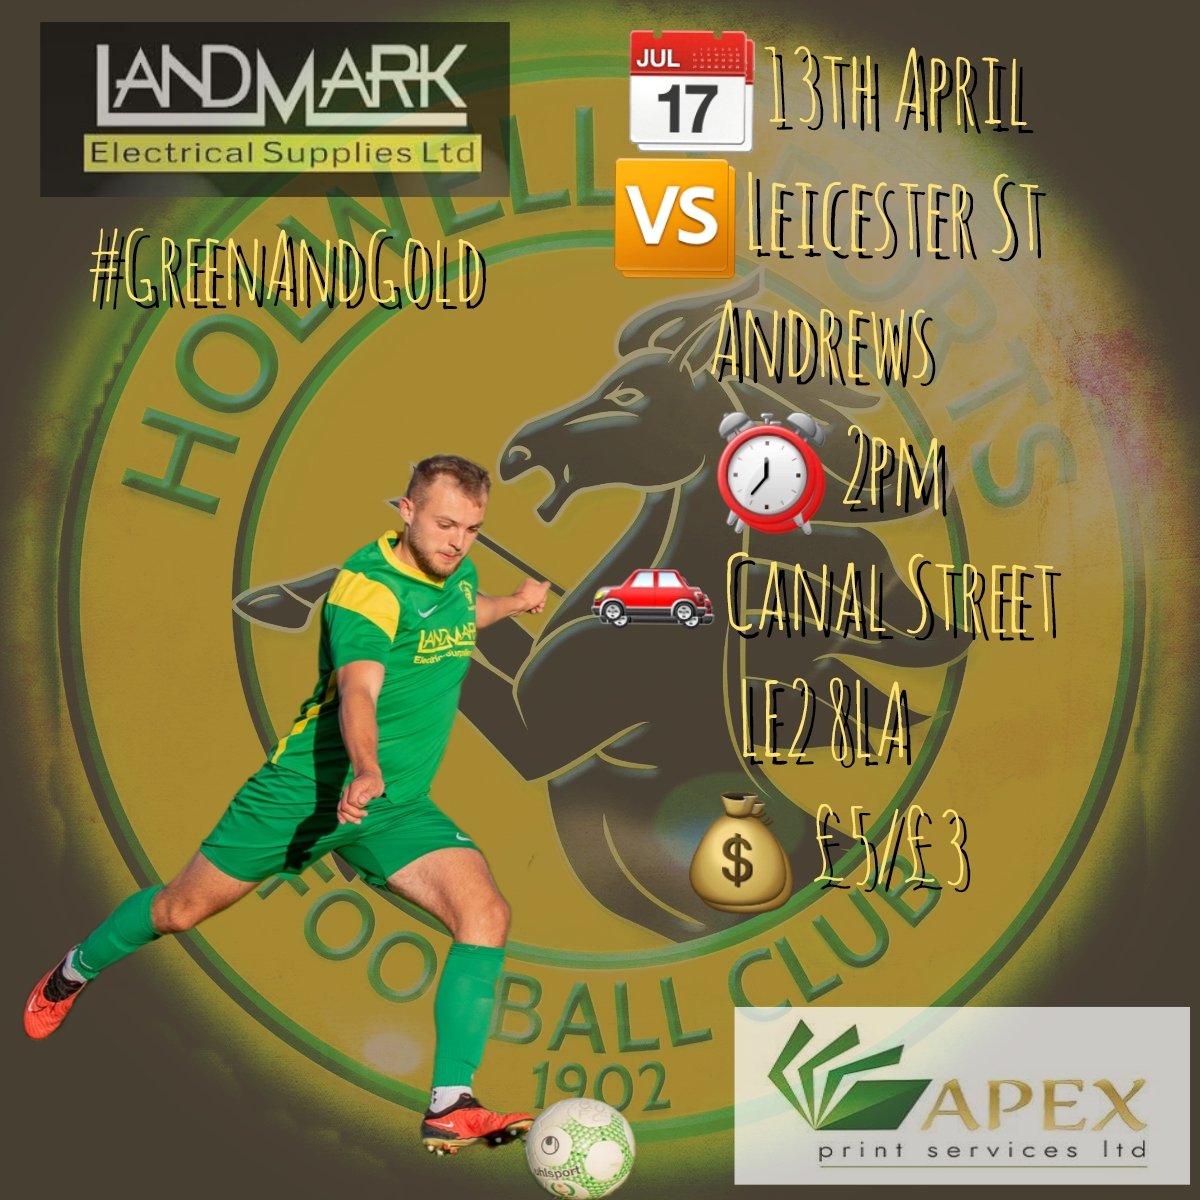 2 to go of the 2023/24 season for the #GreenAndGold. Away day travels and an earlier 2pm ko for this one, as we head over to @Standrewsbar Come join us @SportsEye1 @meltontimes @utdcos @nemmtweets @meltonsports @UCLFanZone @theeyeradio